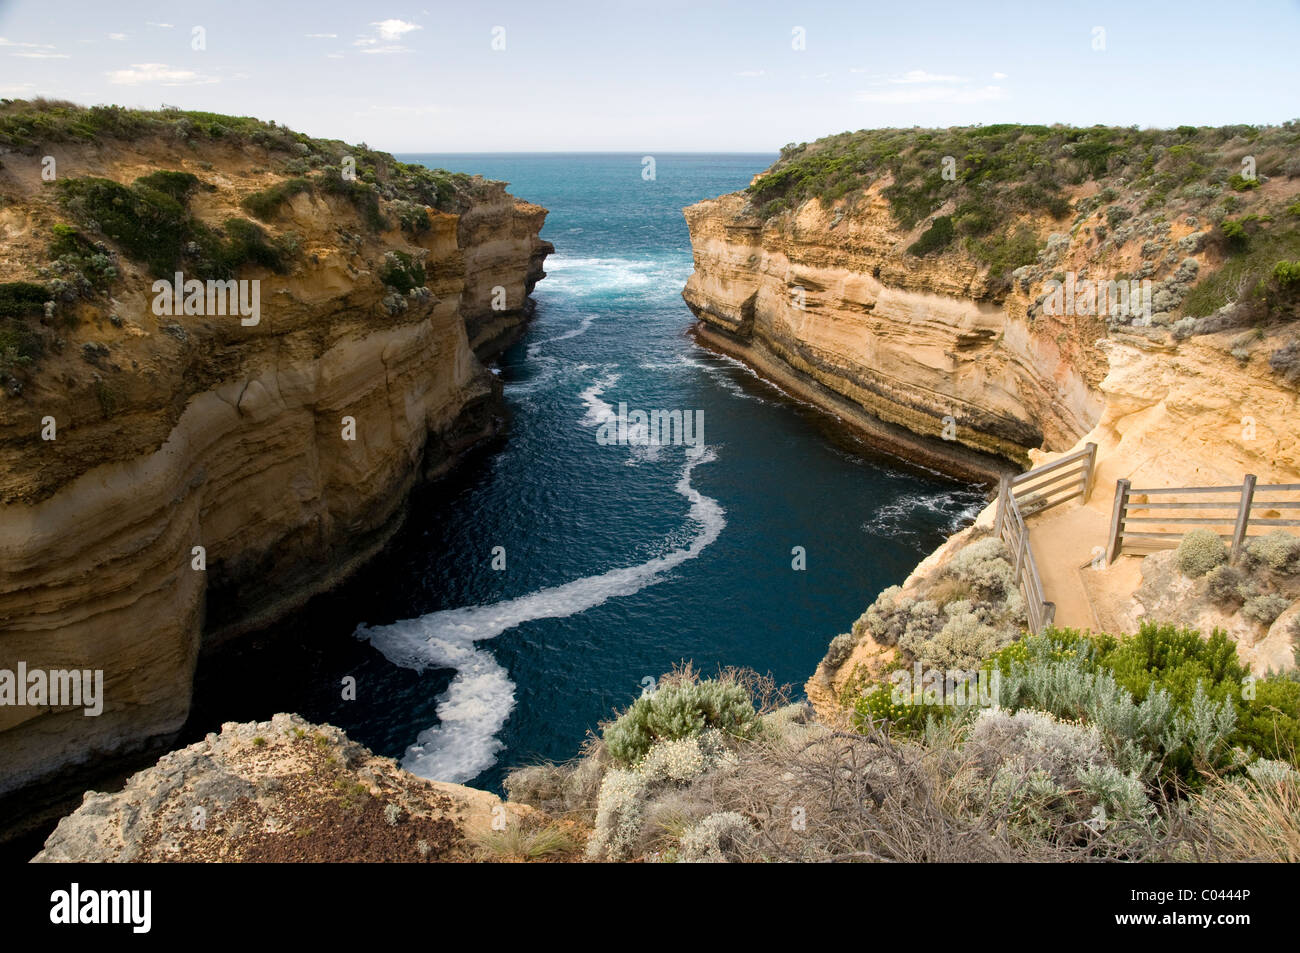 Eroded seacliffs, Lord Ard Gorge, Port Campbell National Park, Great Ocean Road, Victoria, Australia Stock Photo